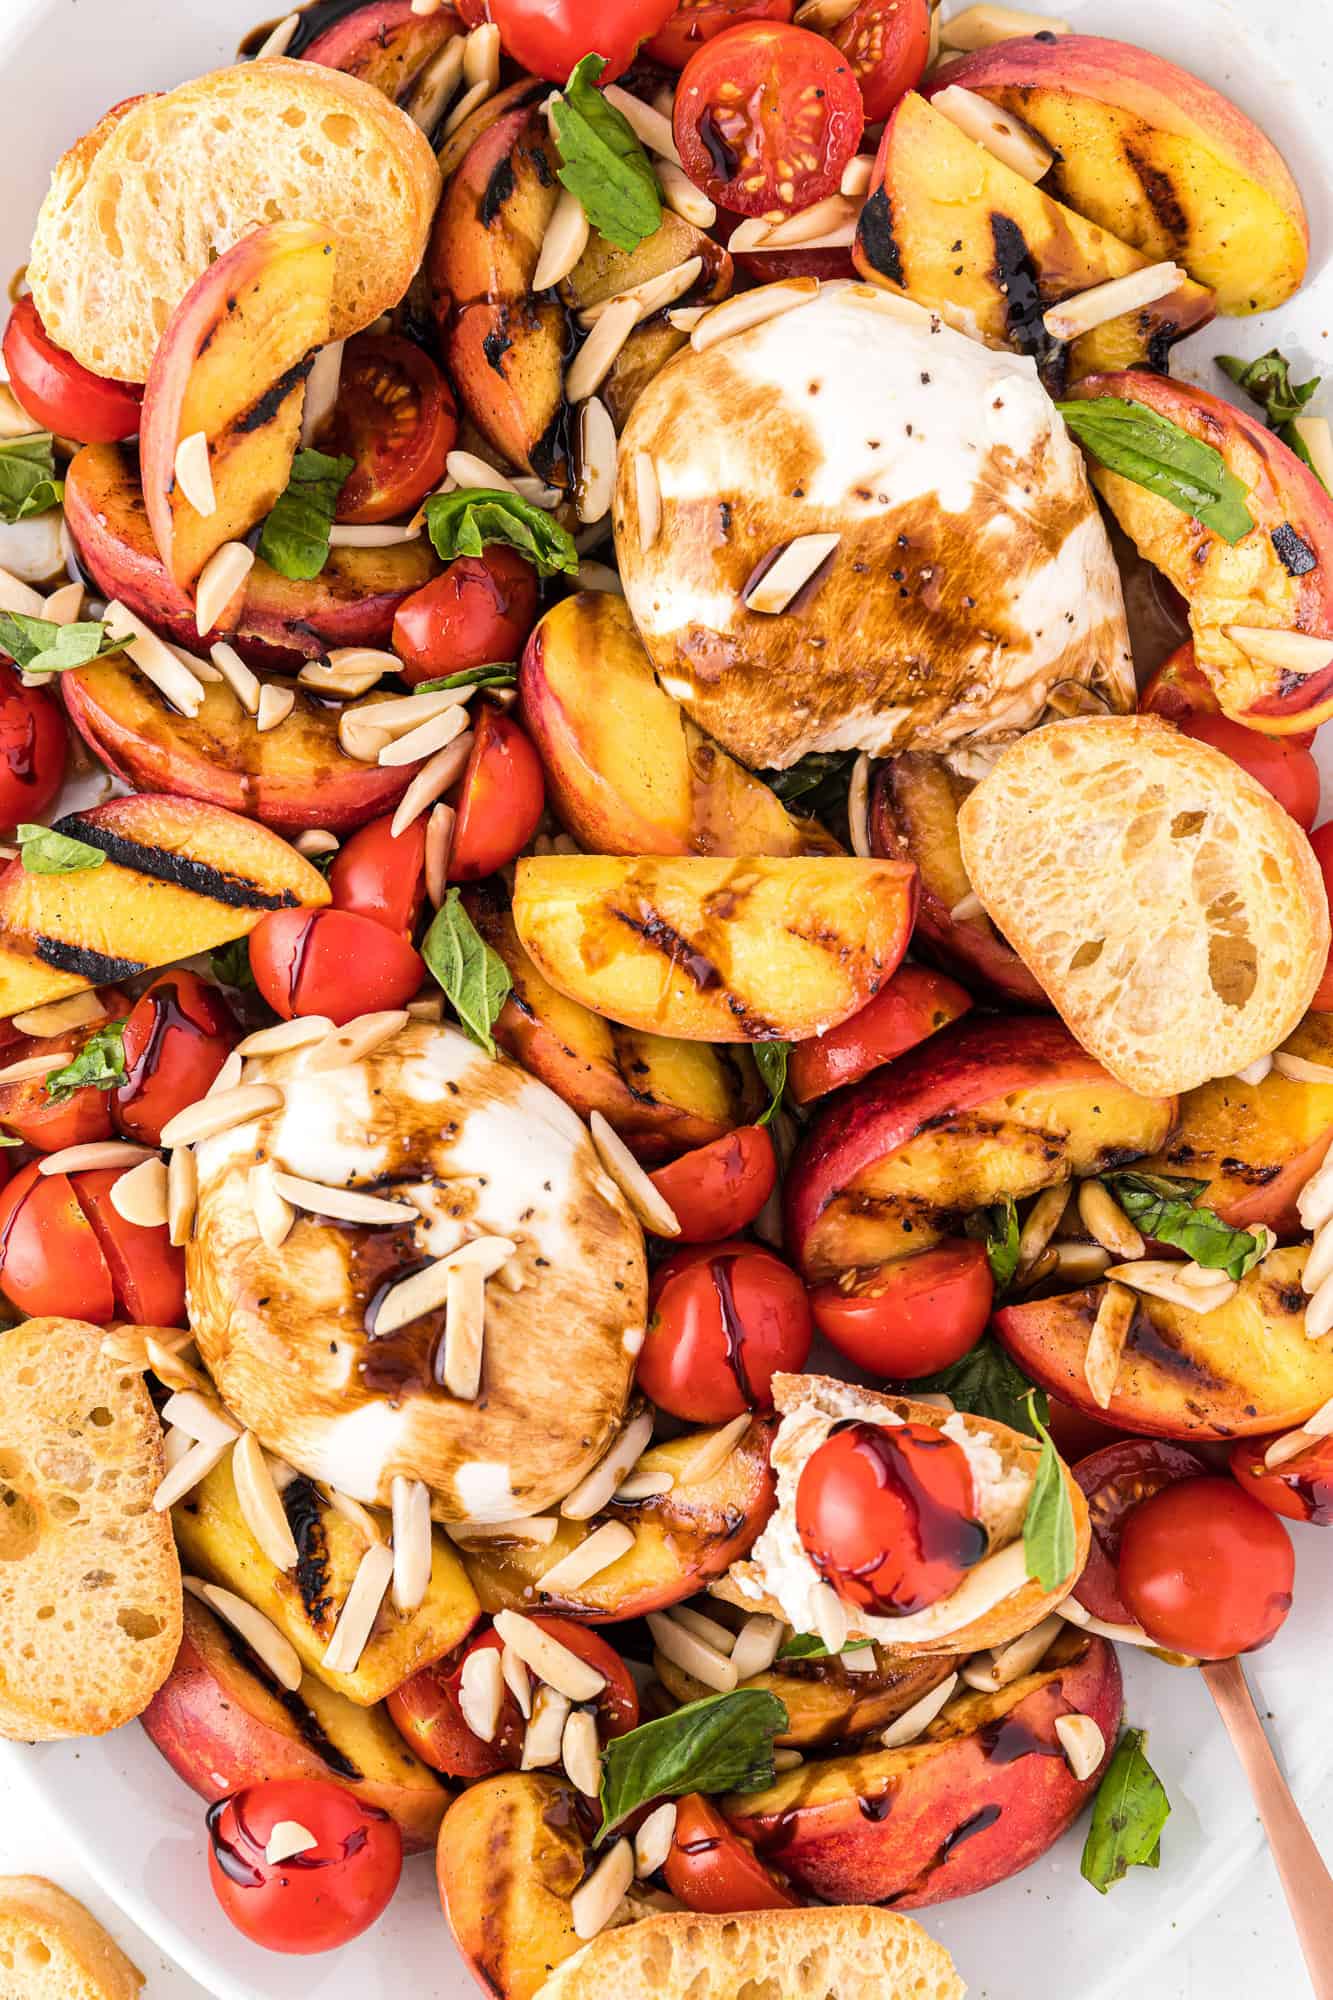 Grilled peach salad with tomatoes, with crostini for serving.